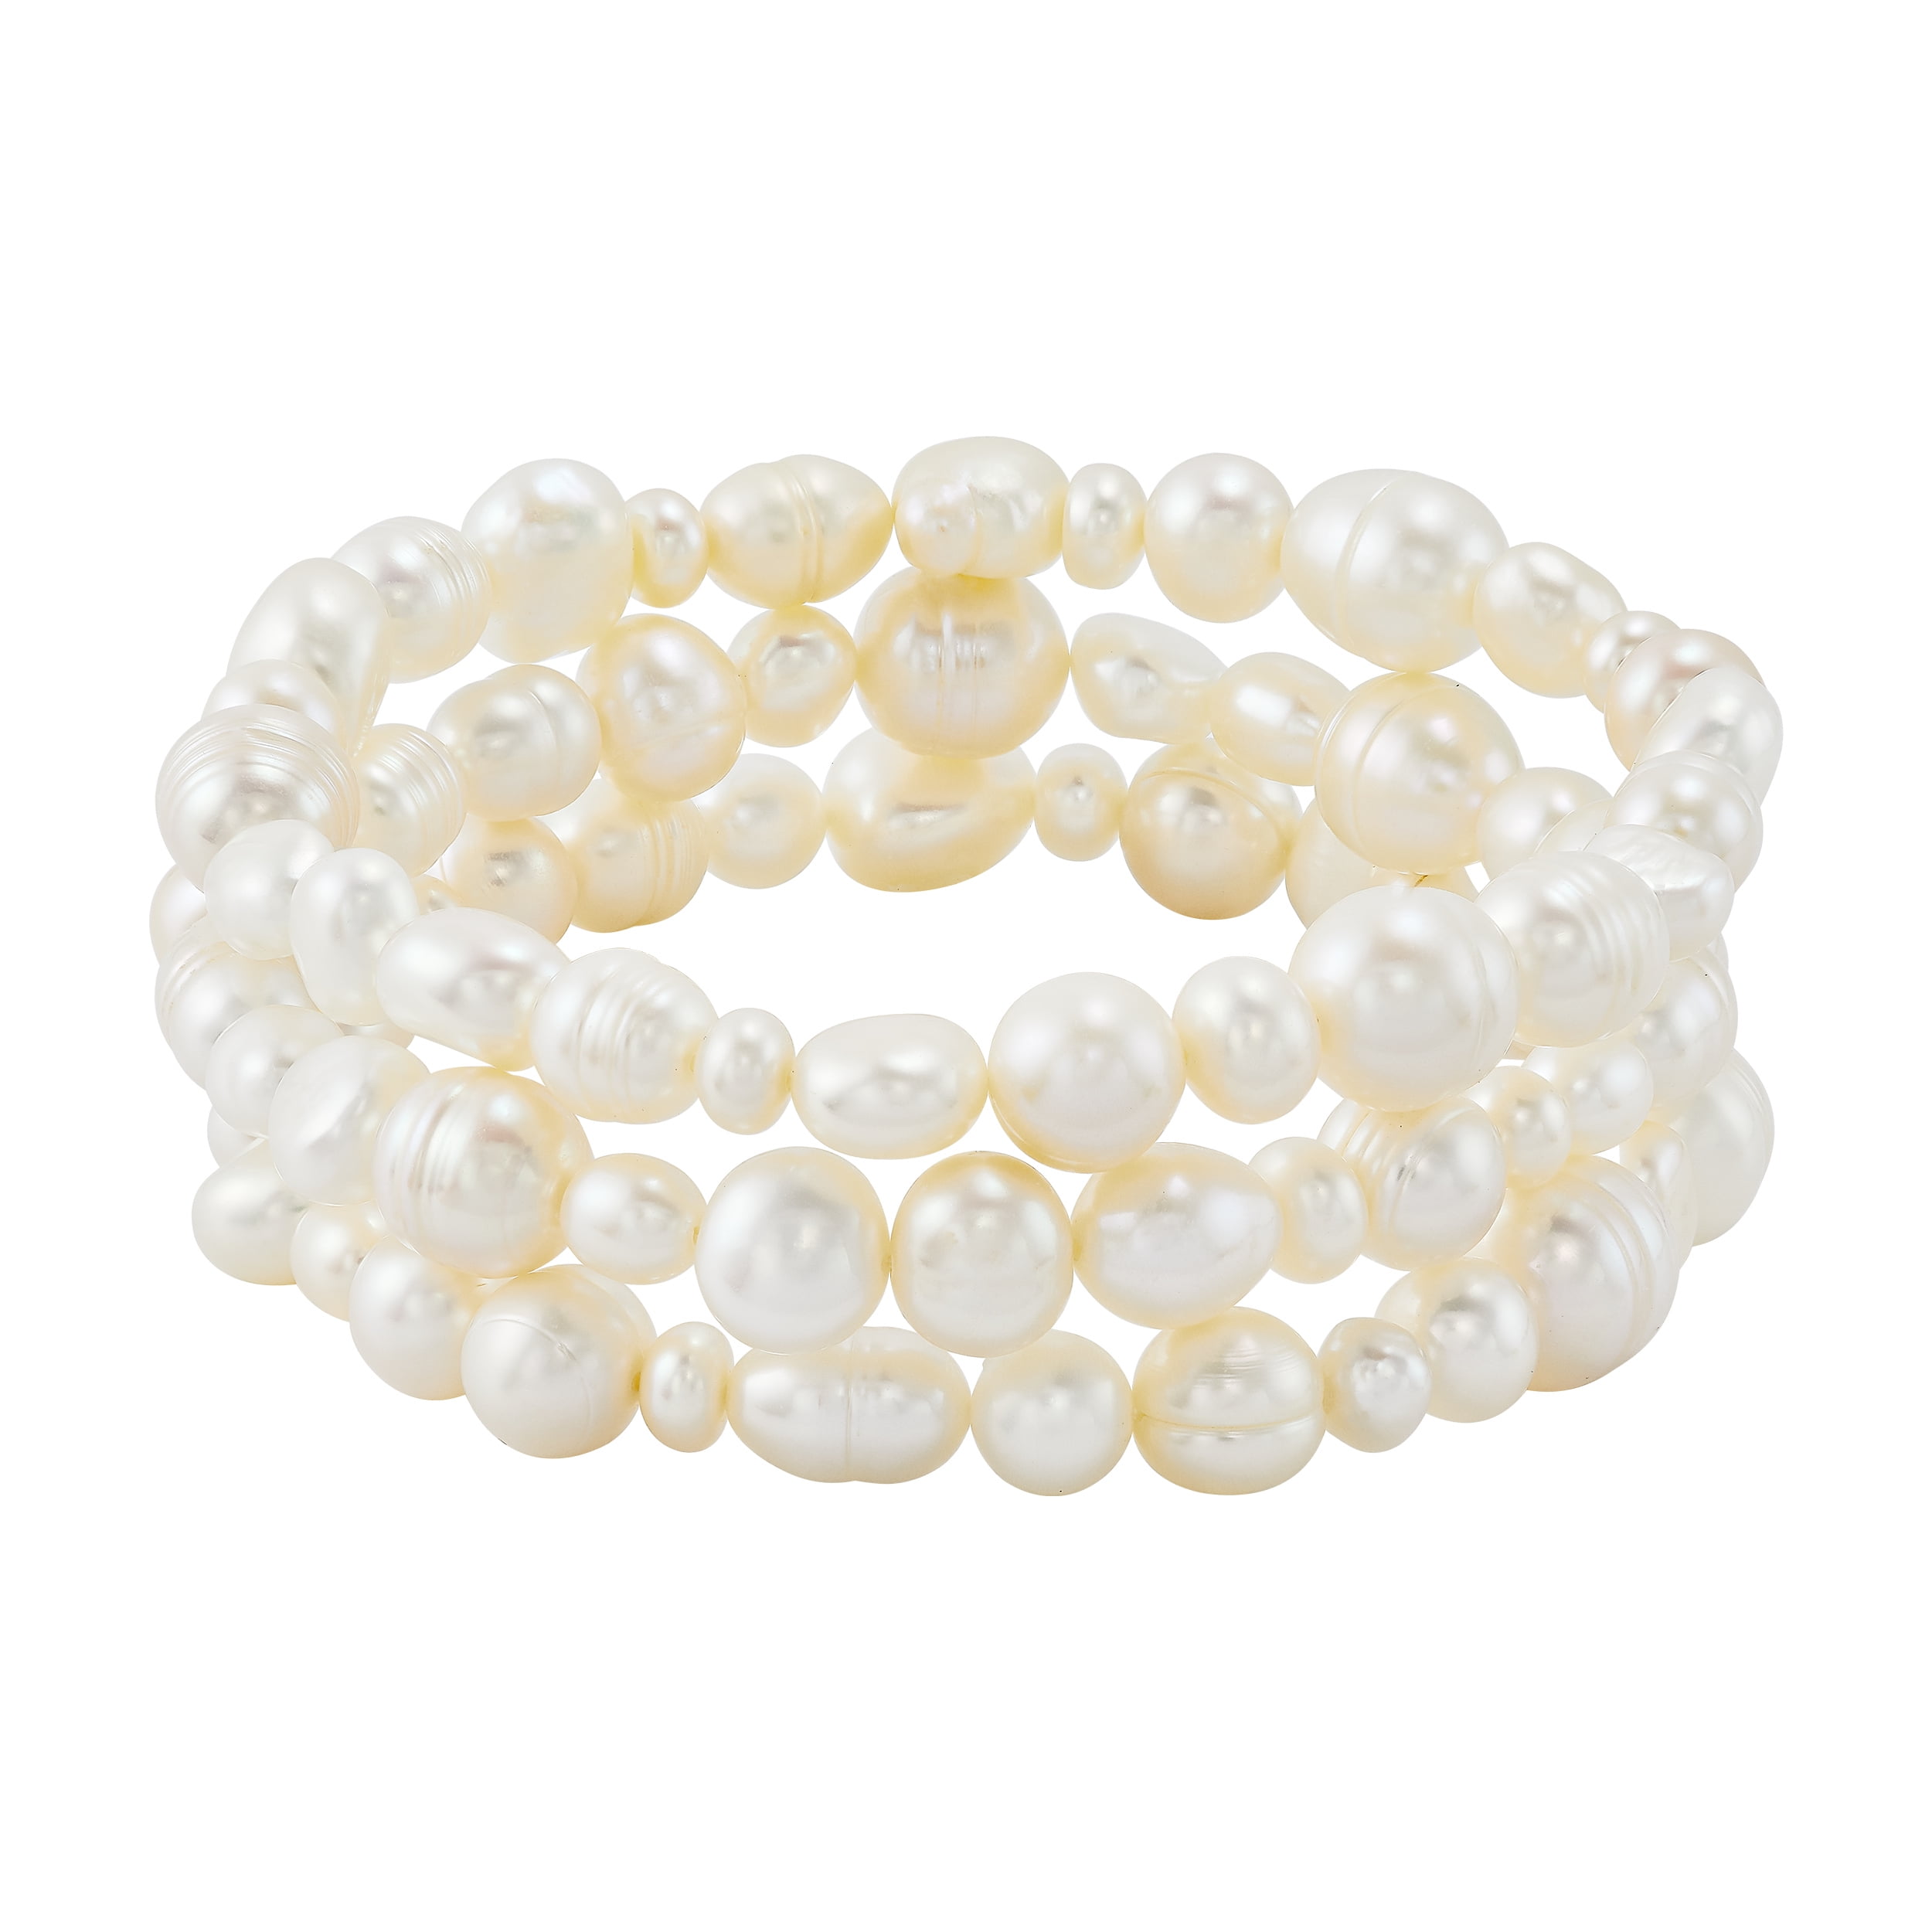 Essentials by Honora Womens Baroque Freshwater White Pearl Stretch Bracelets Set, Women's, Gold